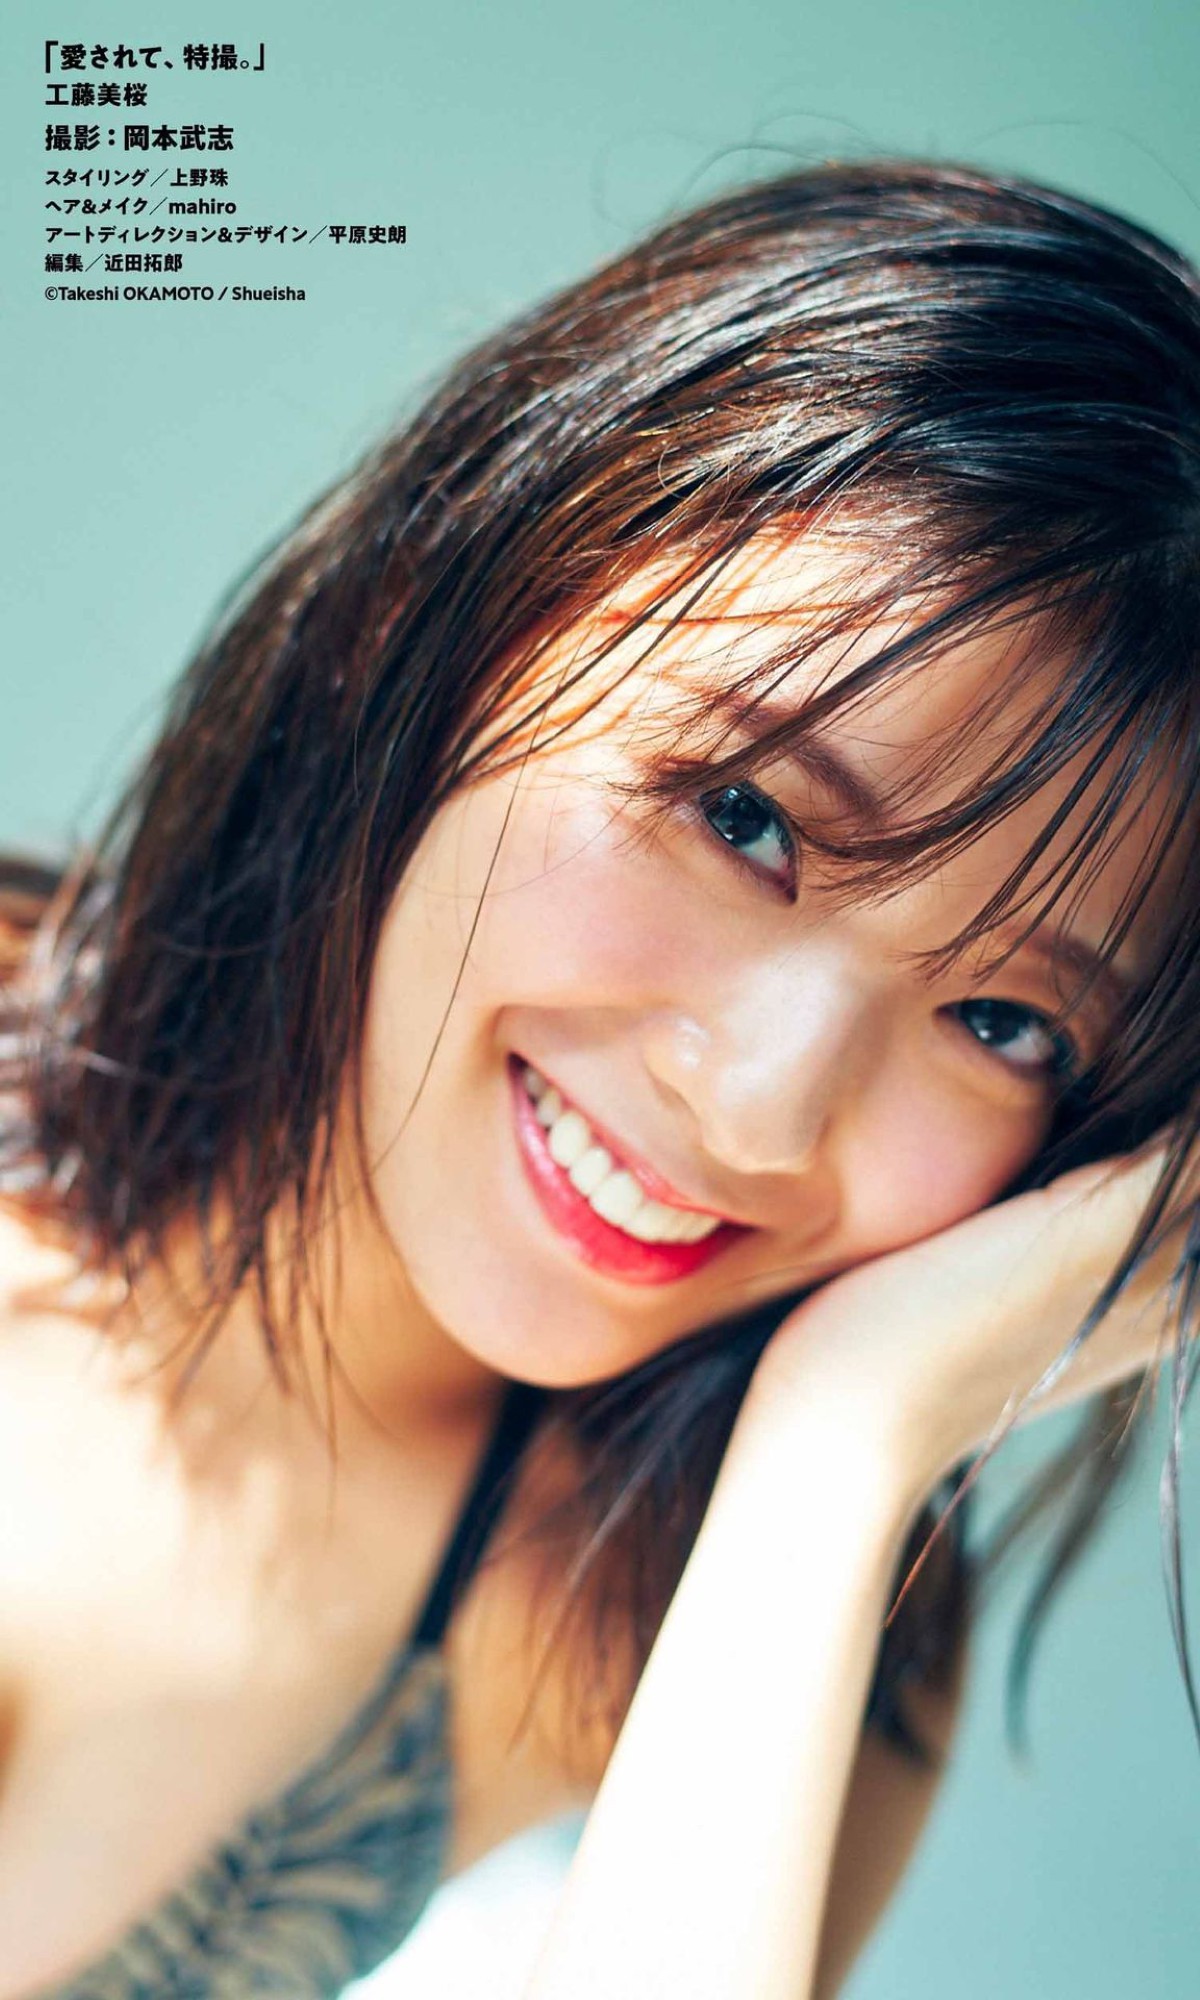 Digital Limited Mio Kudo 工藤美桜 Be Loved Special Effects 0050 8702512863.jpg